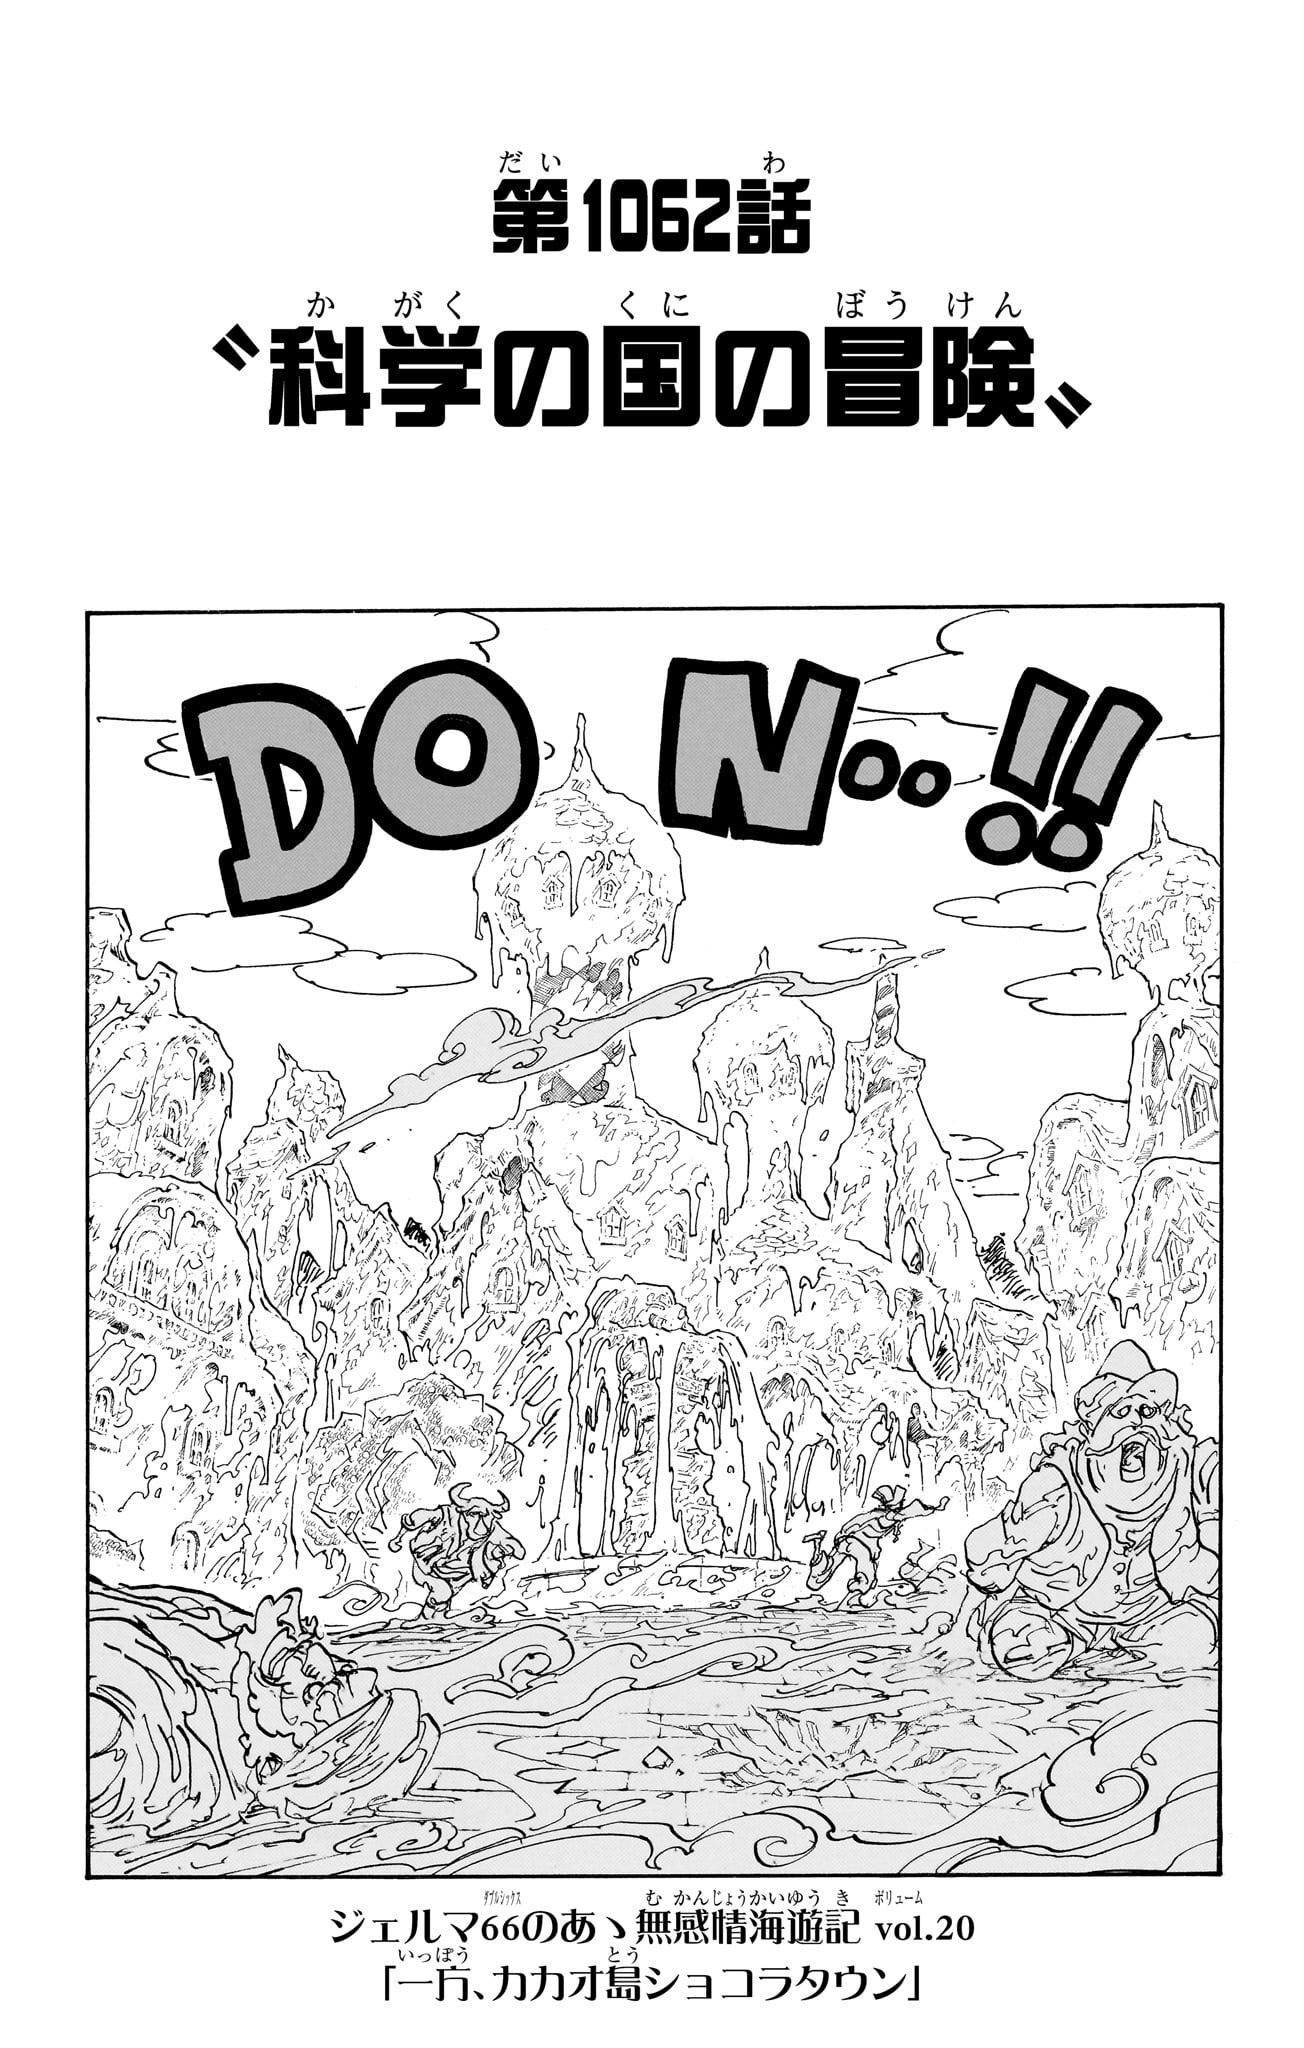 Chapter 1062 Spoilers : r/OnePiece